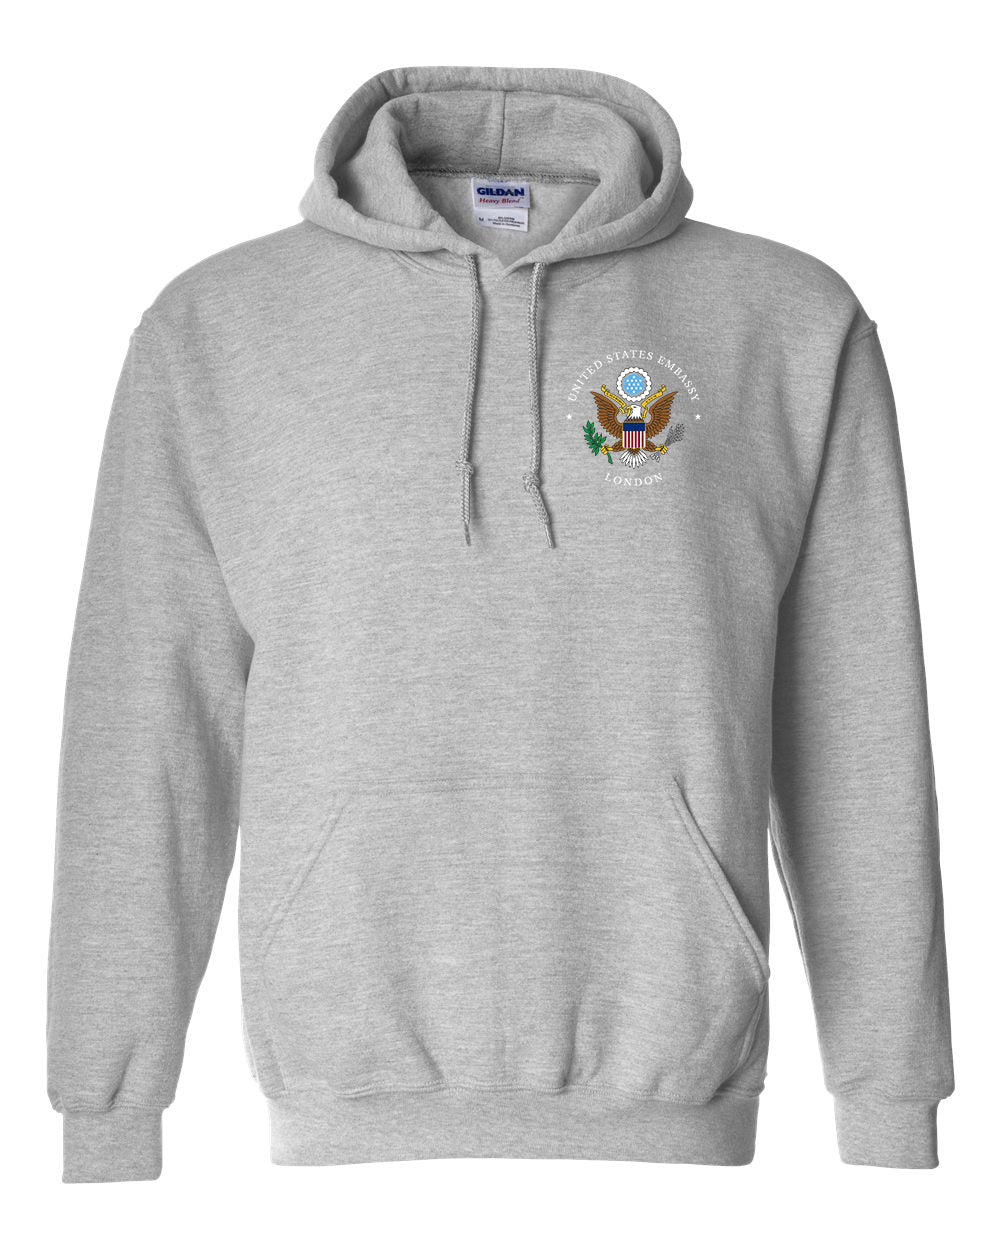 Embroidered London US Embassy Hoodie